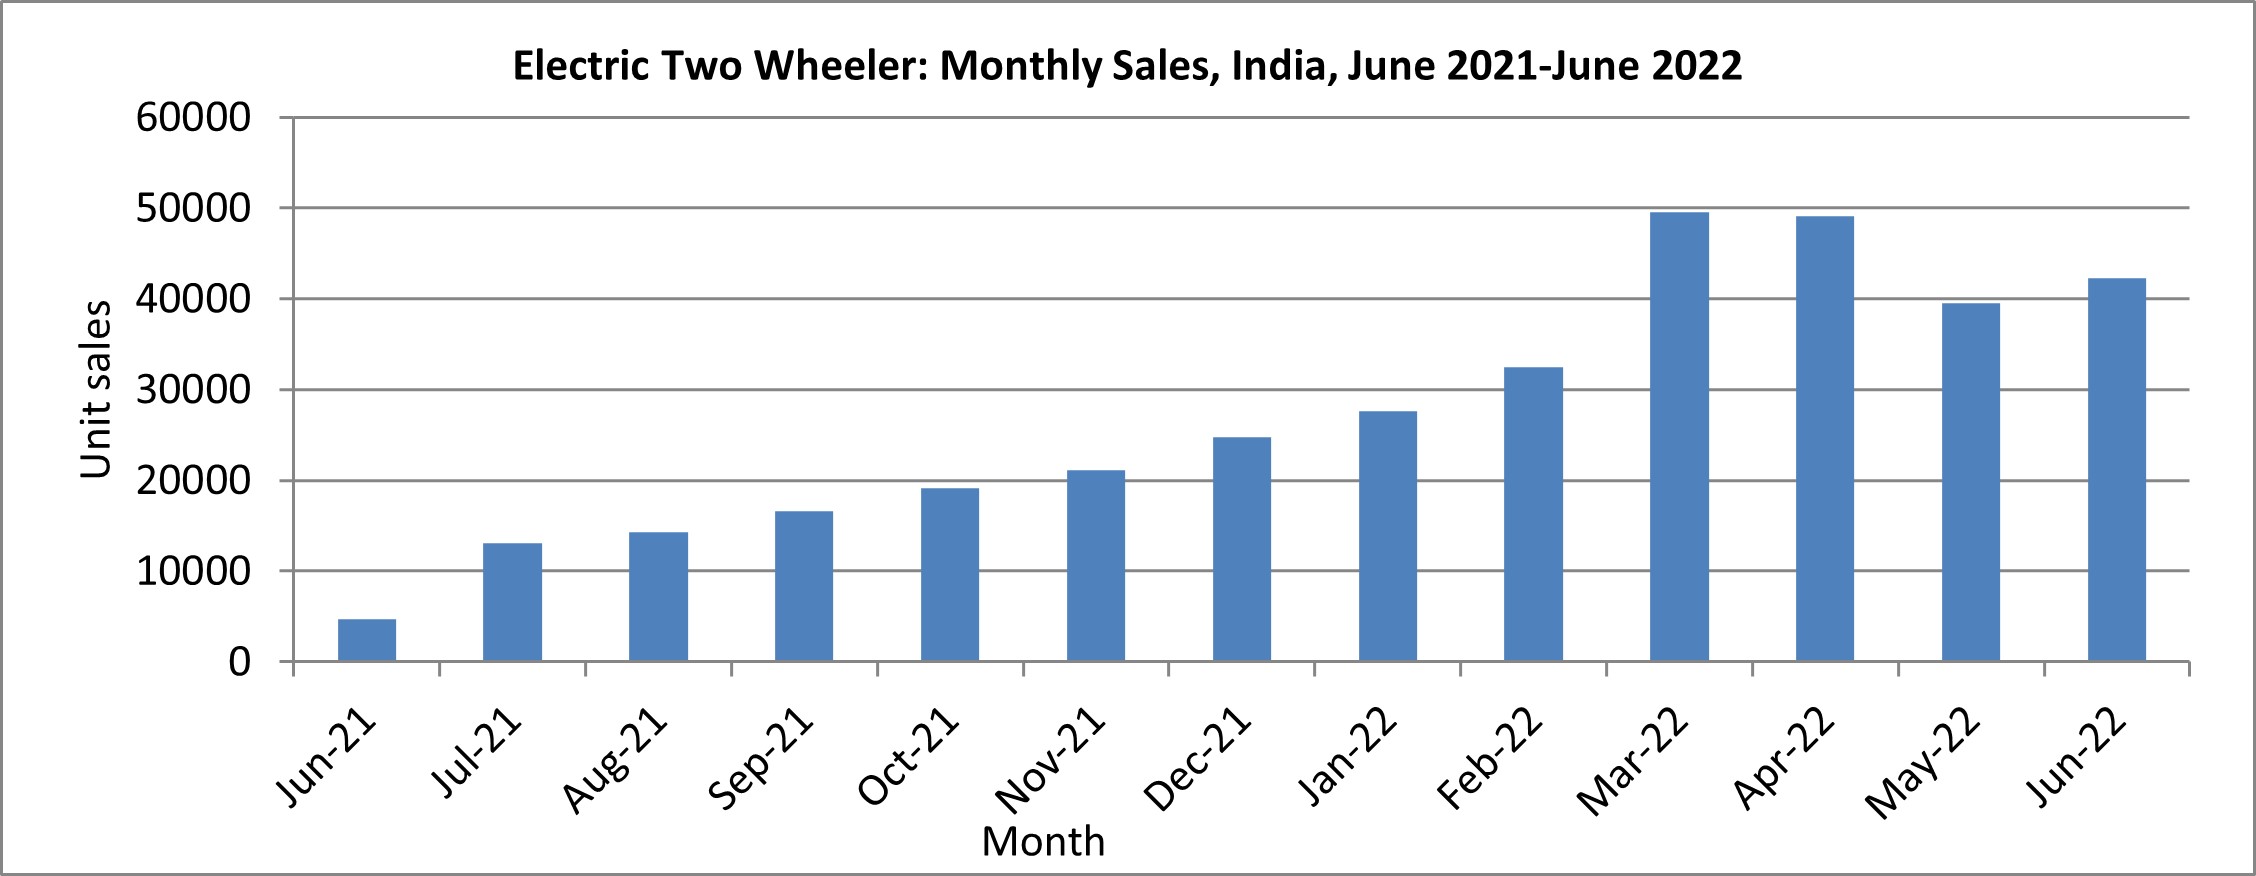 Electric Two Wheeler: Monthly Sales, India, June 2021-June 2022